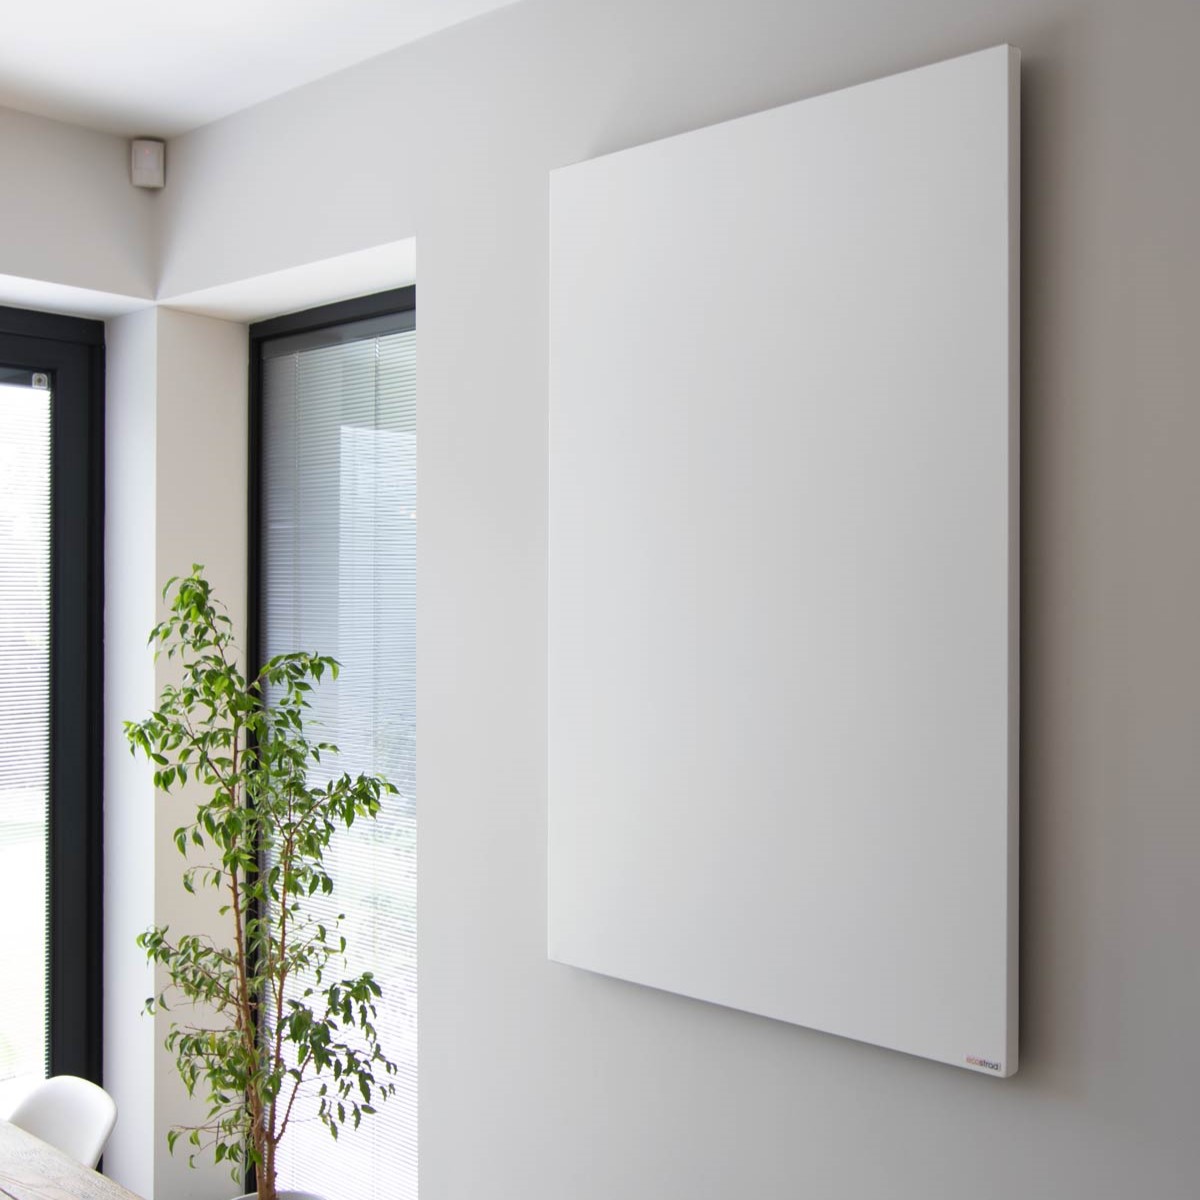 Ecostrad Opus Infrared Panel Heaters